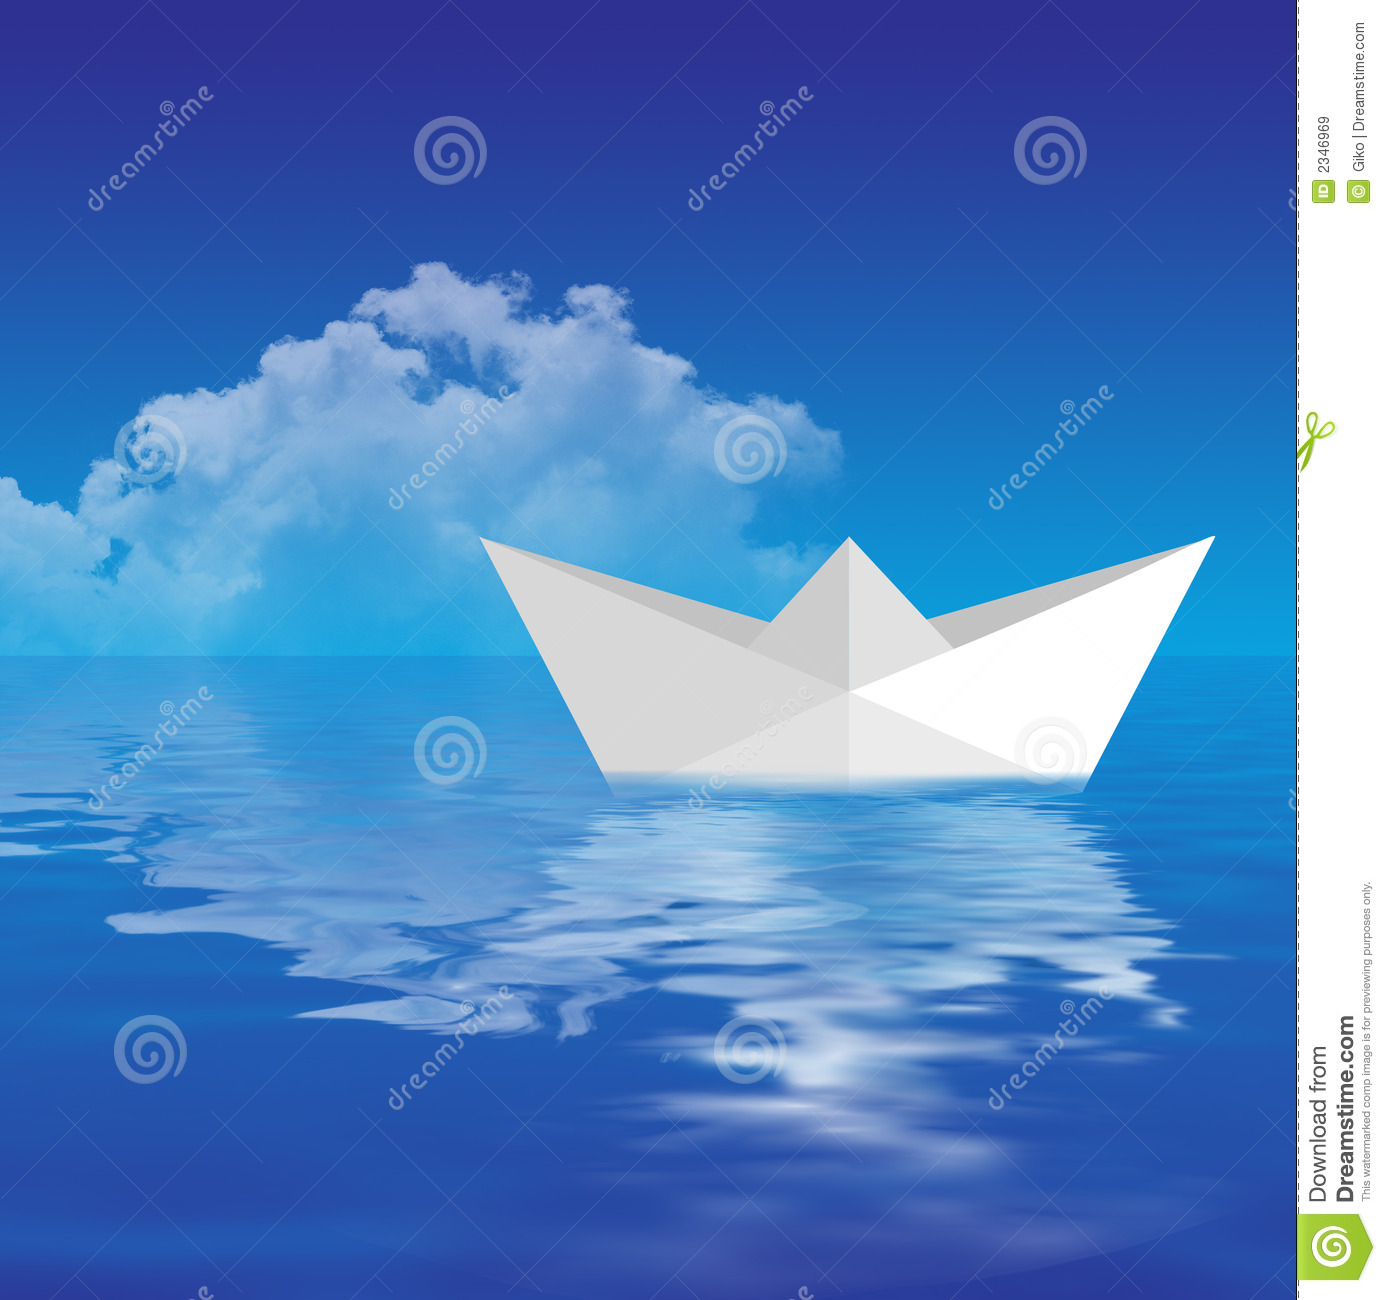 Floating Boat Clipart Paper Boat Floating On Water